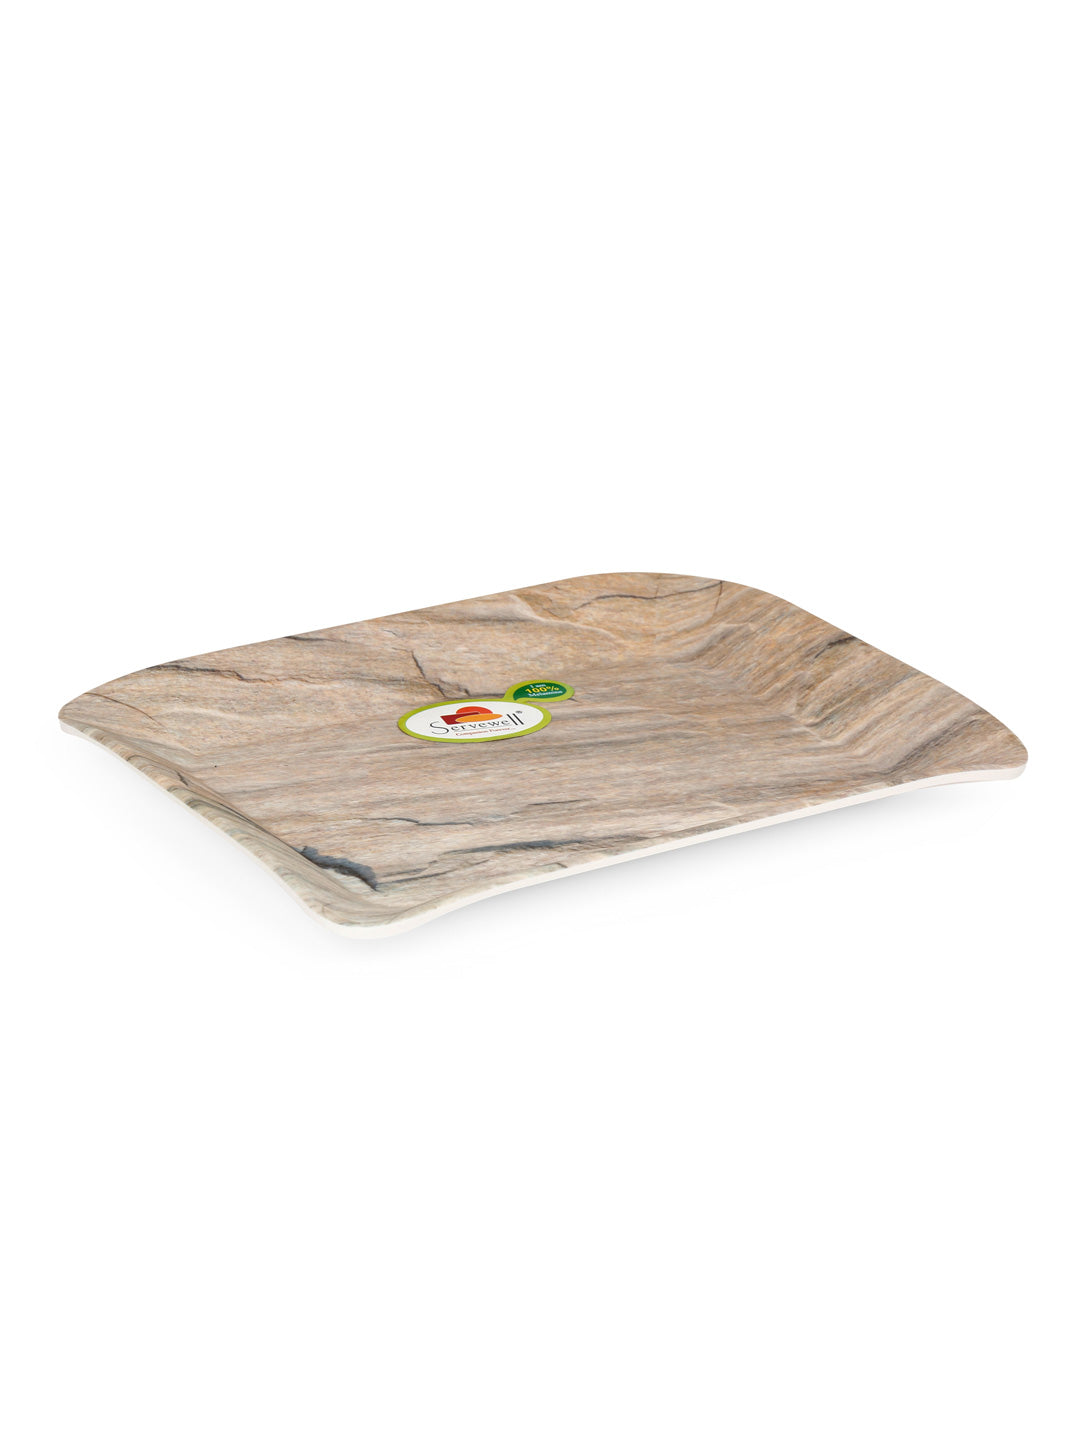 Servewell Tray Small Tropical Bn22X16Cm S2521 (Tropical)